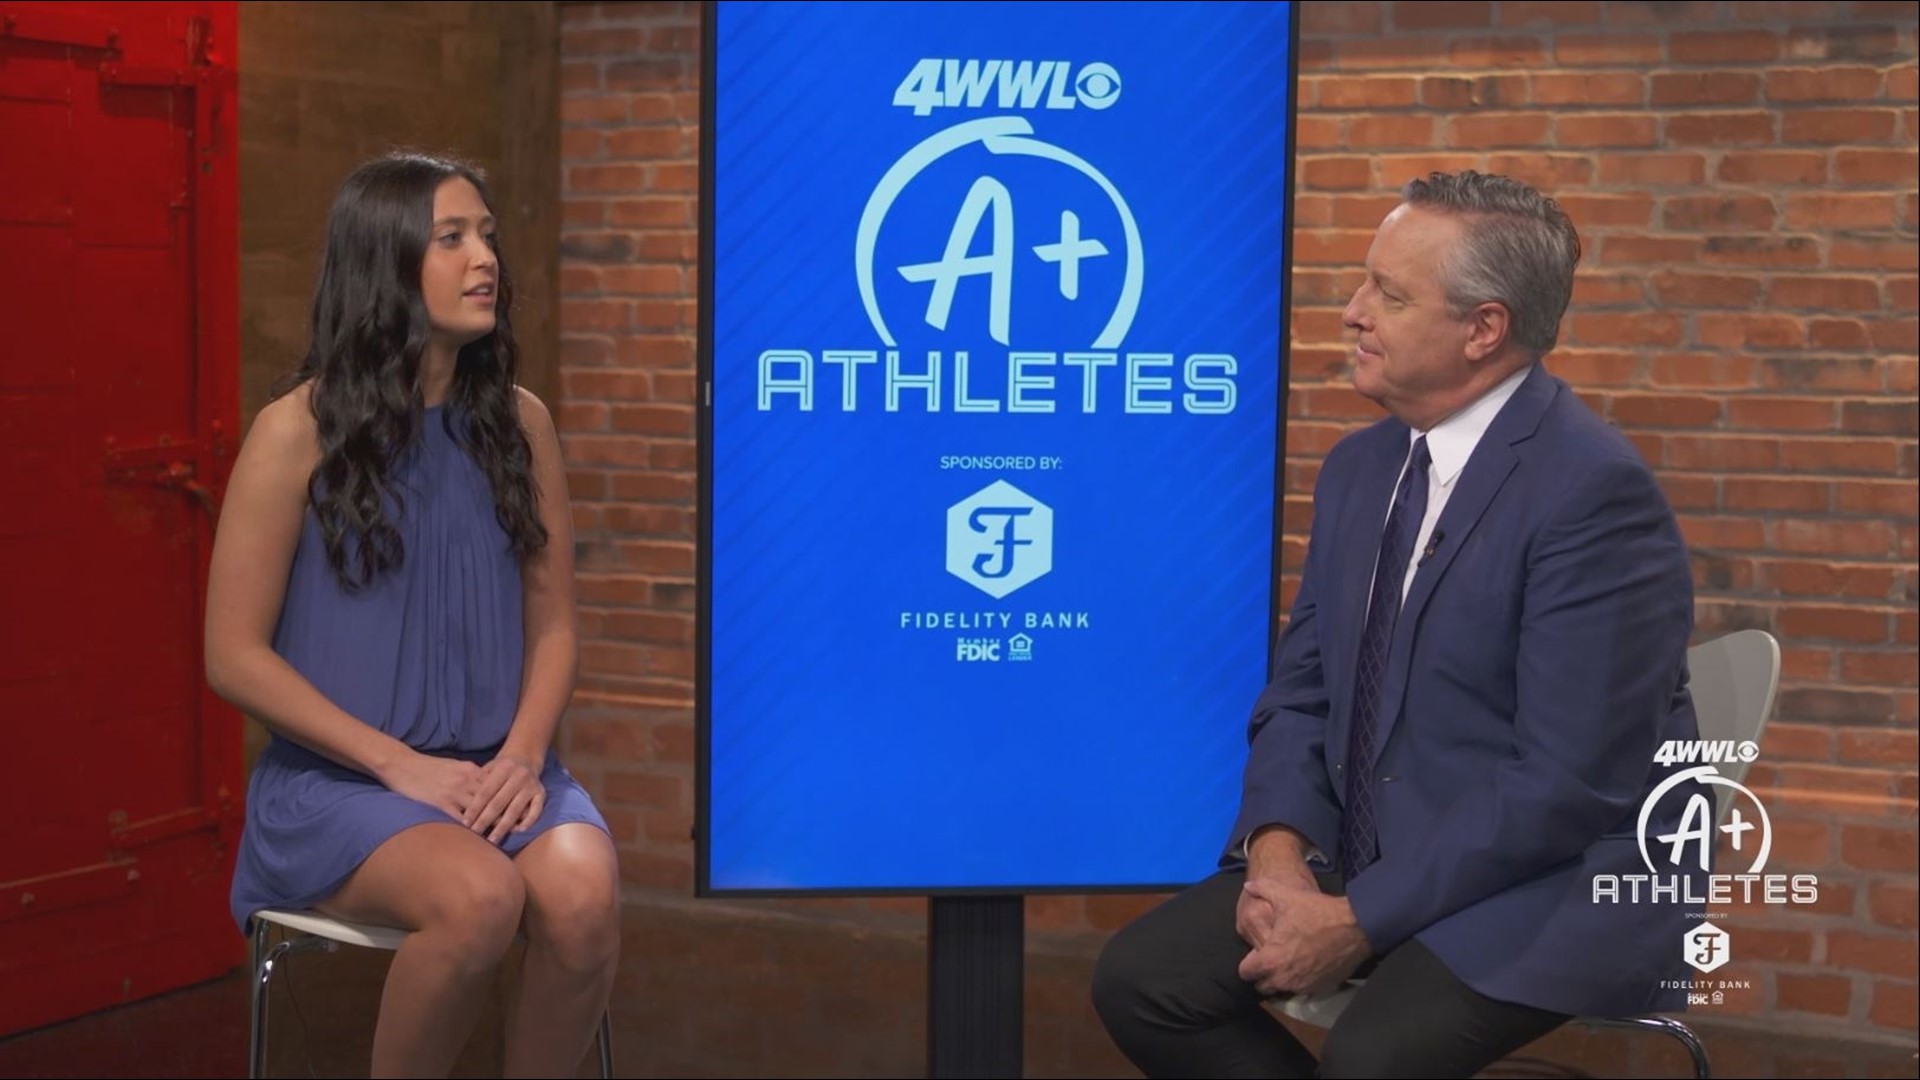 WWL-TV is honoring athletes who excel on and off the field, like St. Scholastica's Maren Davis!